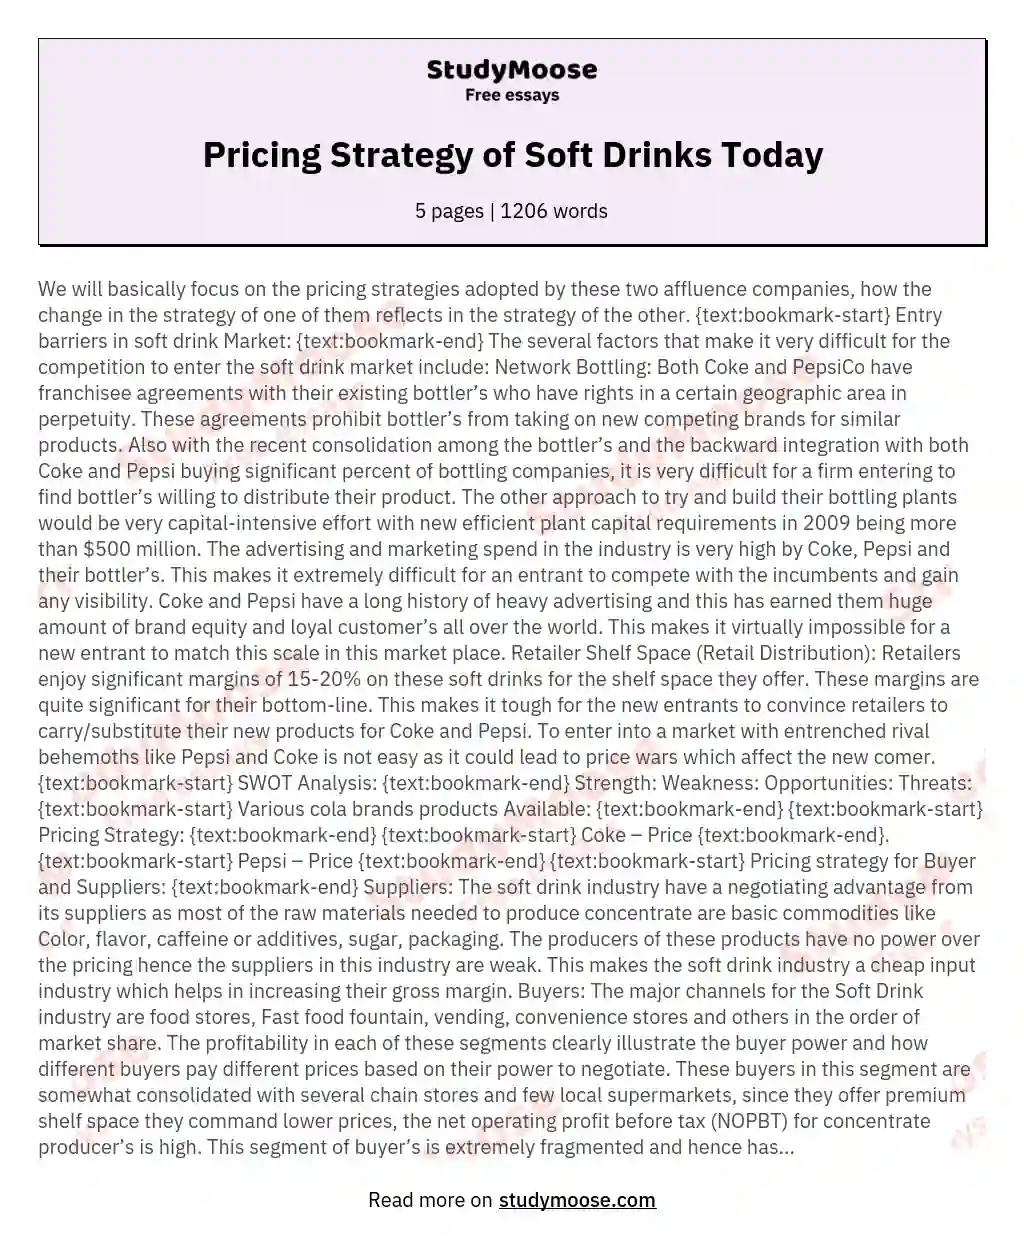 Pricing Strategy of Soft Drinks Today